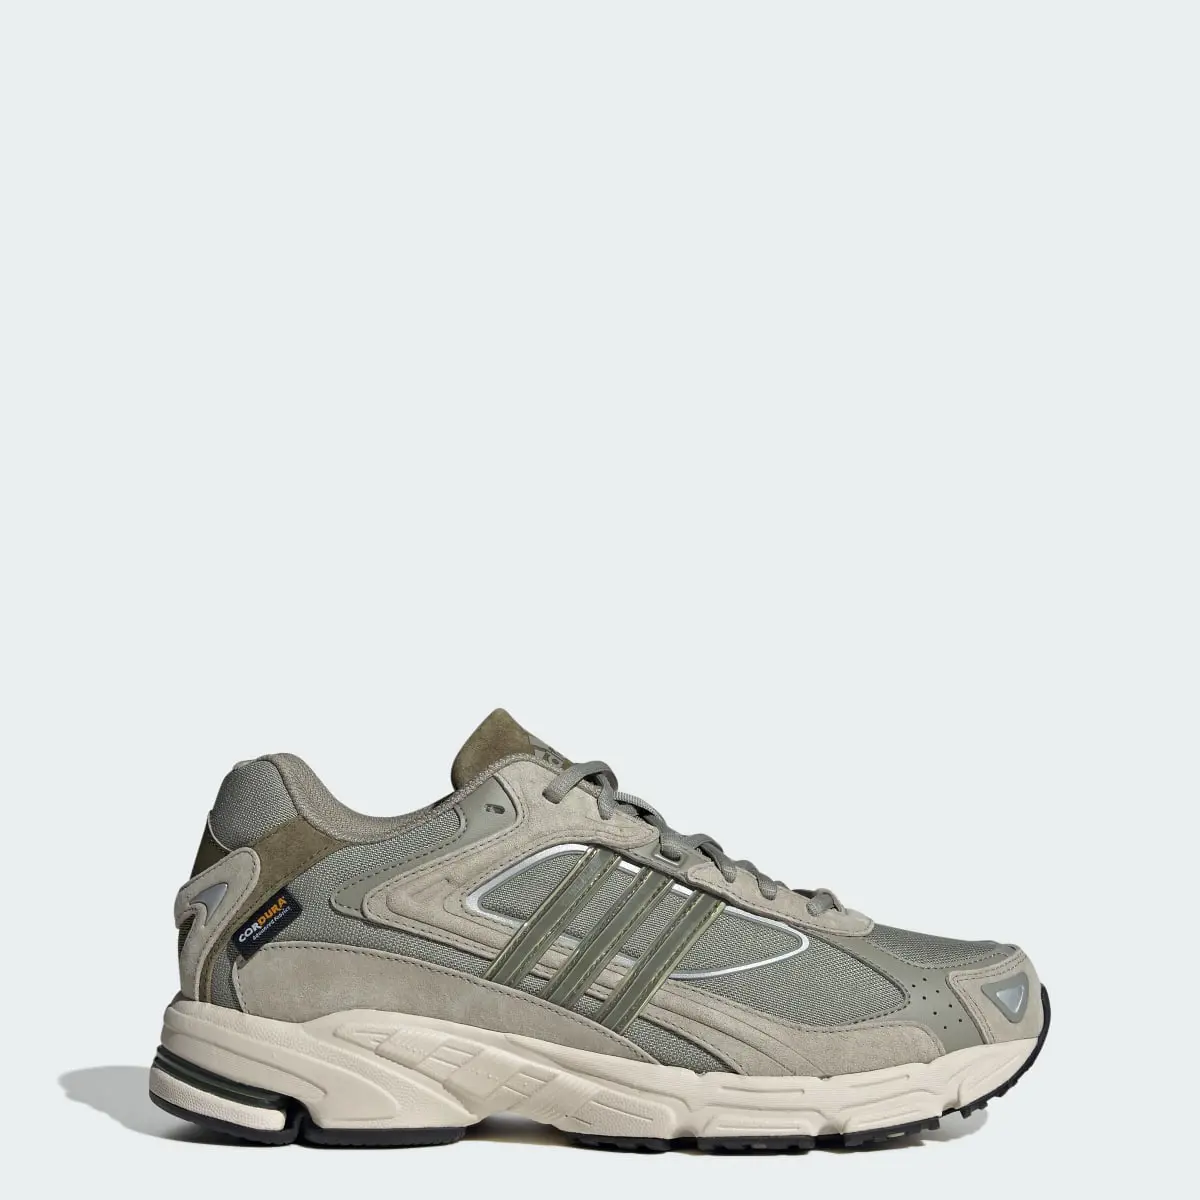 Adidas Response CL Shoes. 1